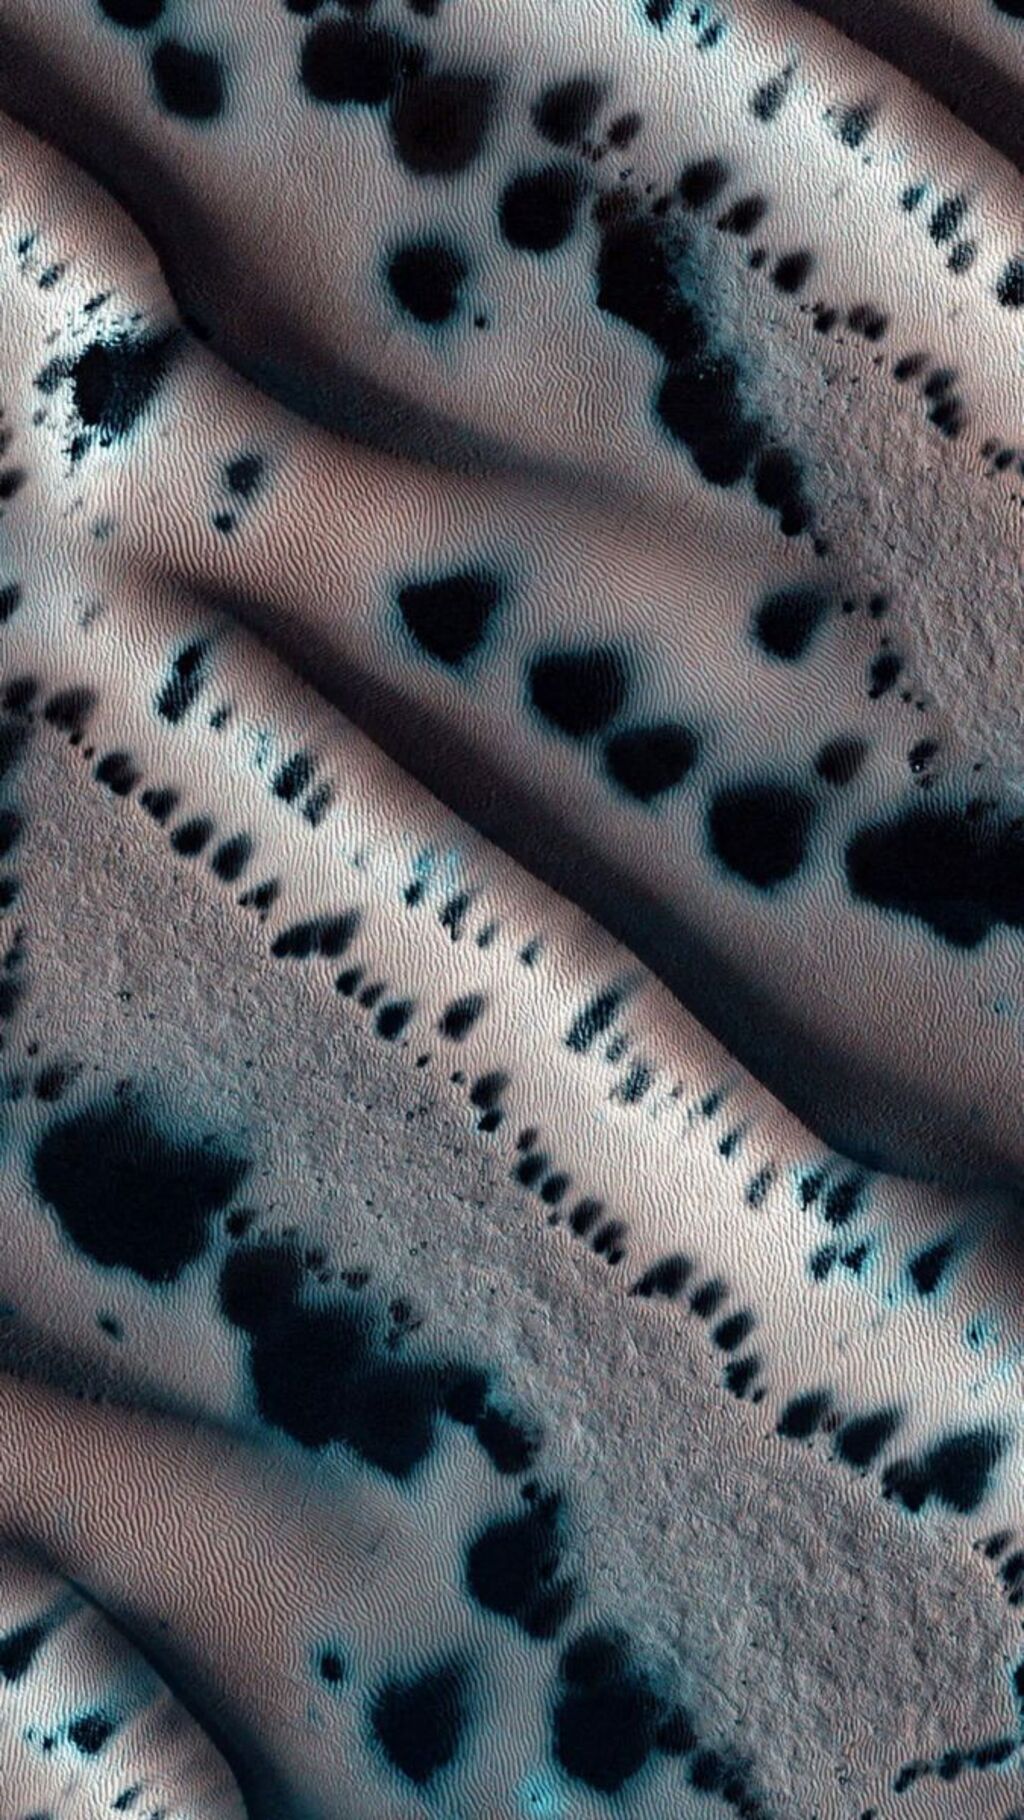 Martian textured surface with black spots